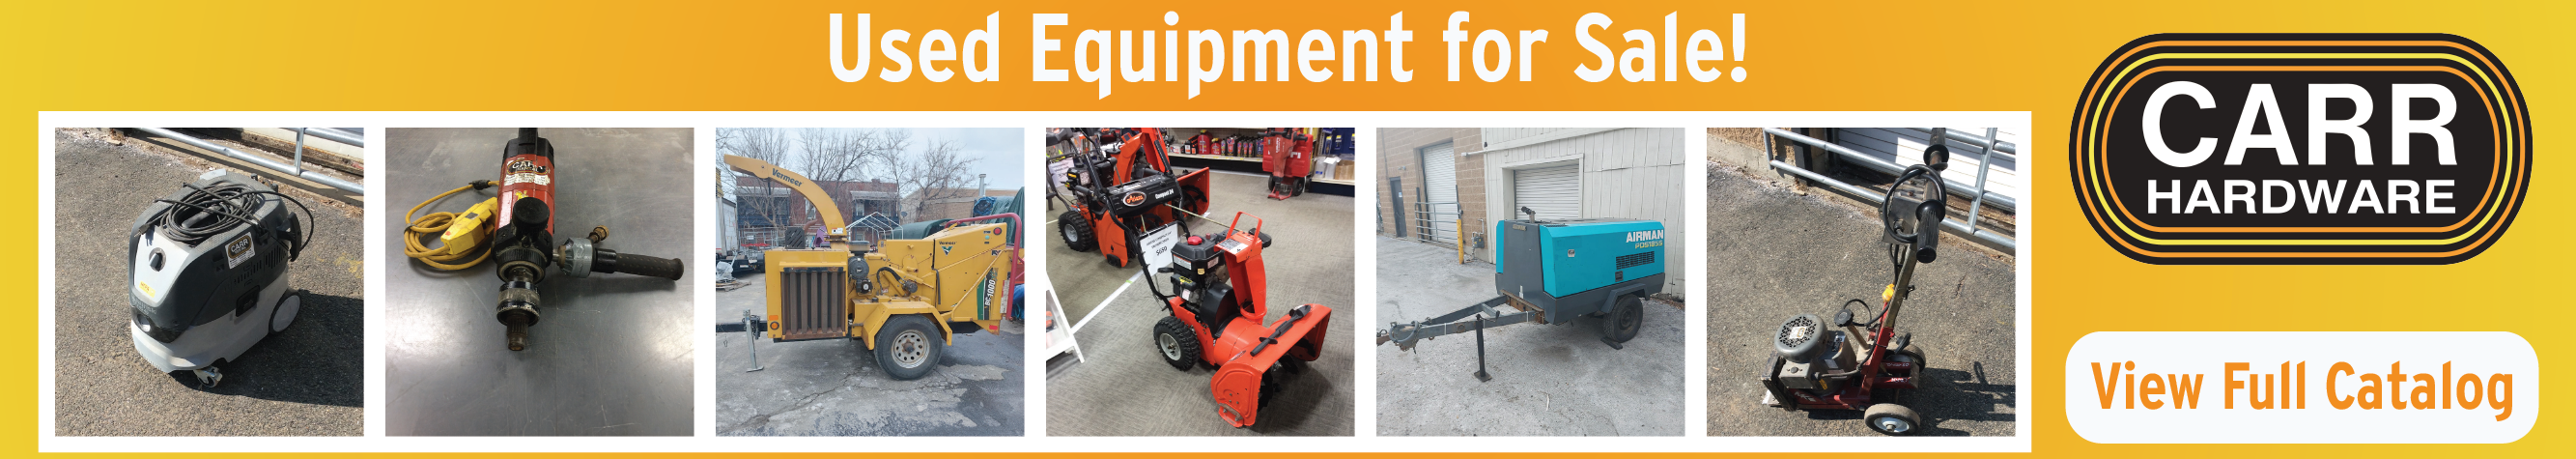 Carr Hardware Used equipment for sale